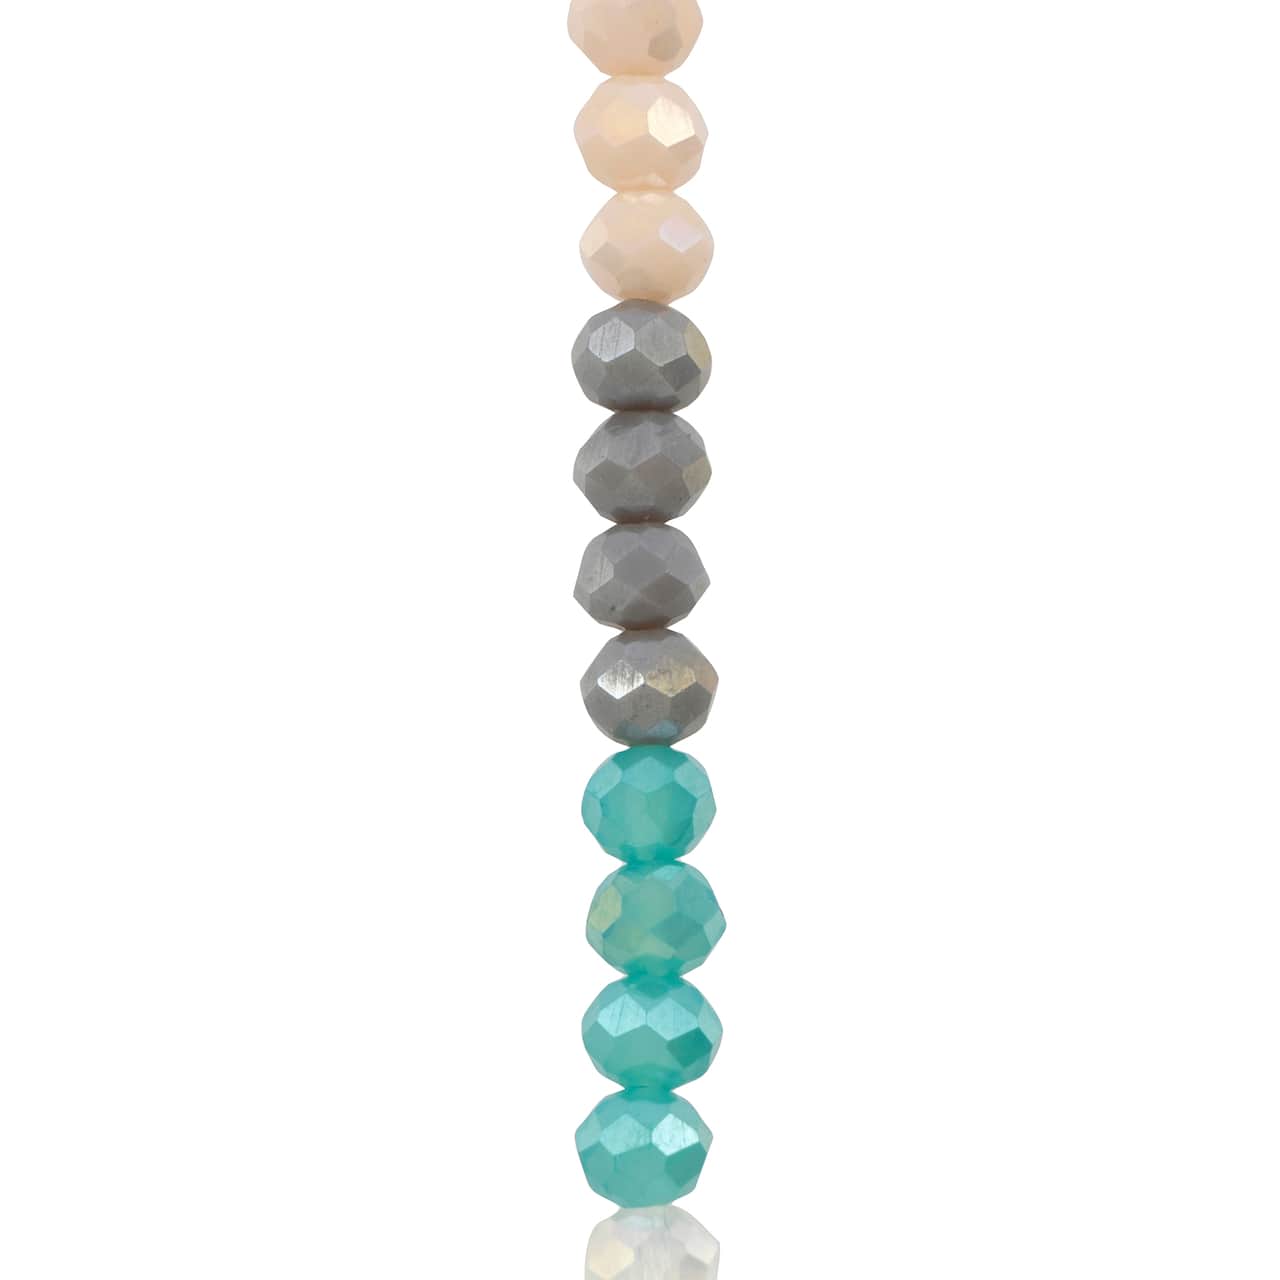 Glass Faceted Rondelle Beads, 4mm by Bead Landing™